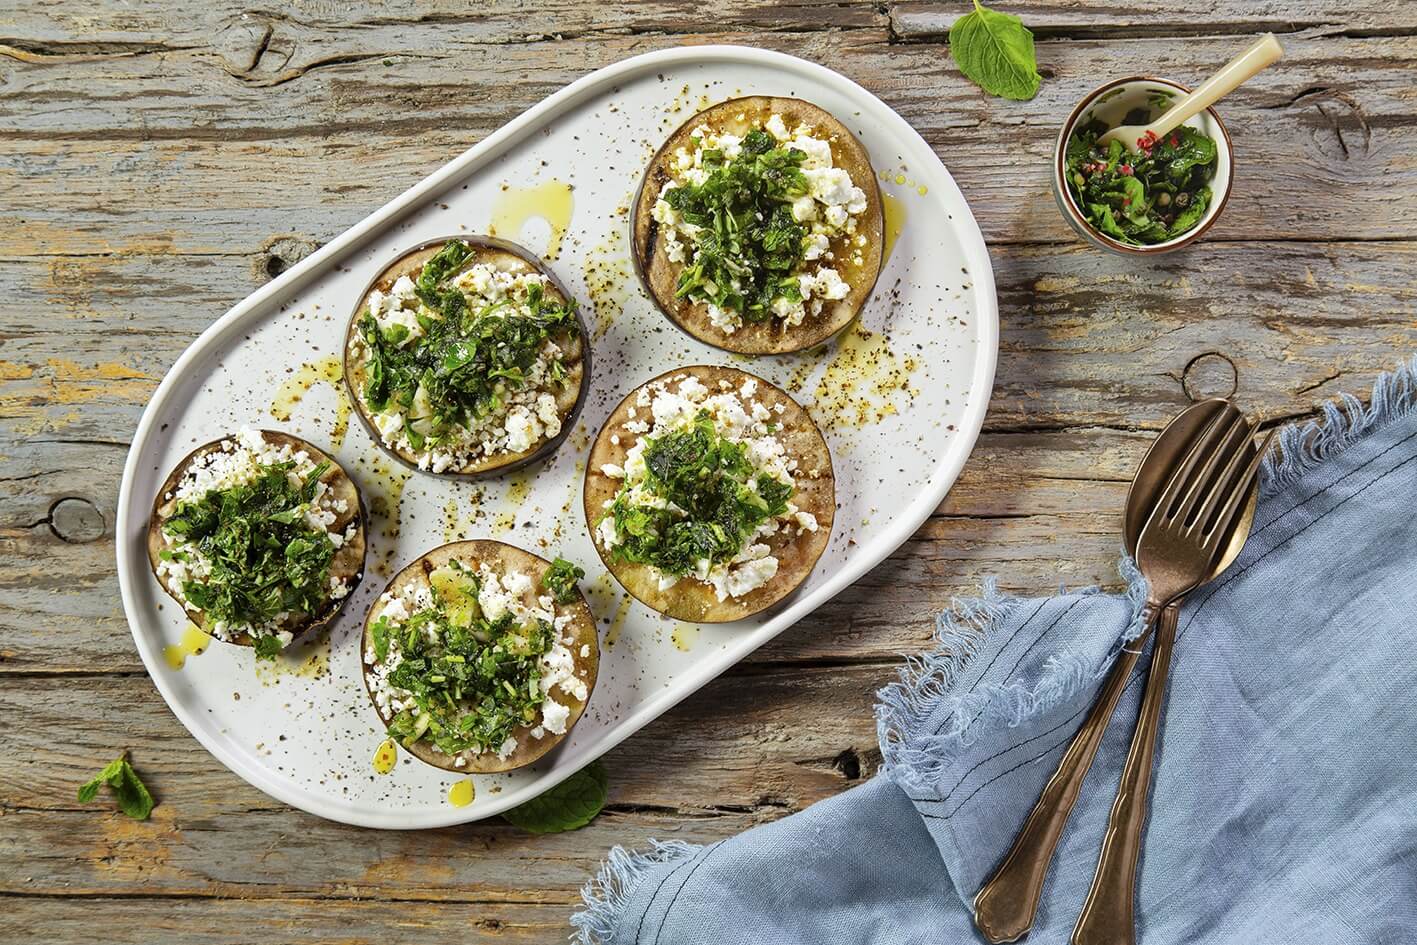 Grilled aubergine with feta cheese and herbs | Victor Guedes